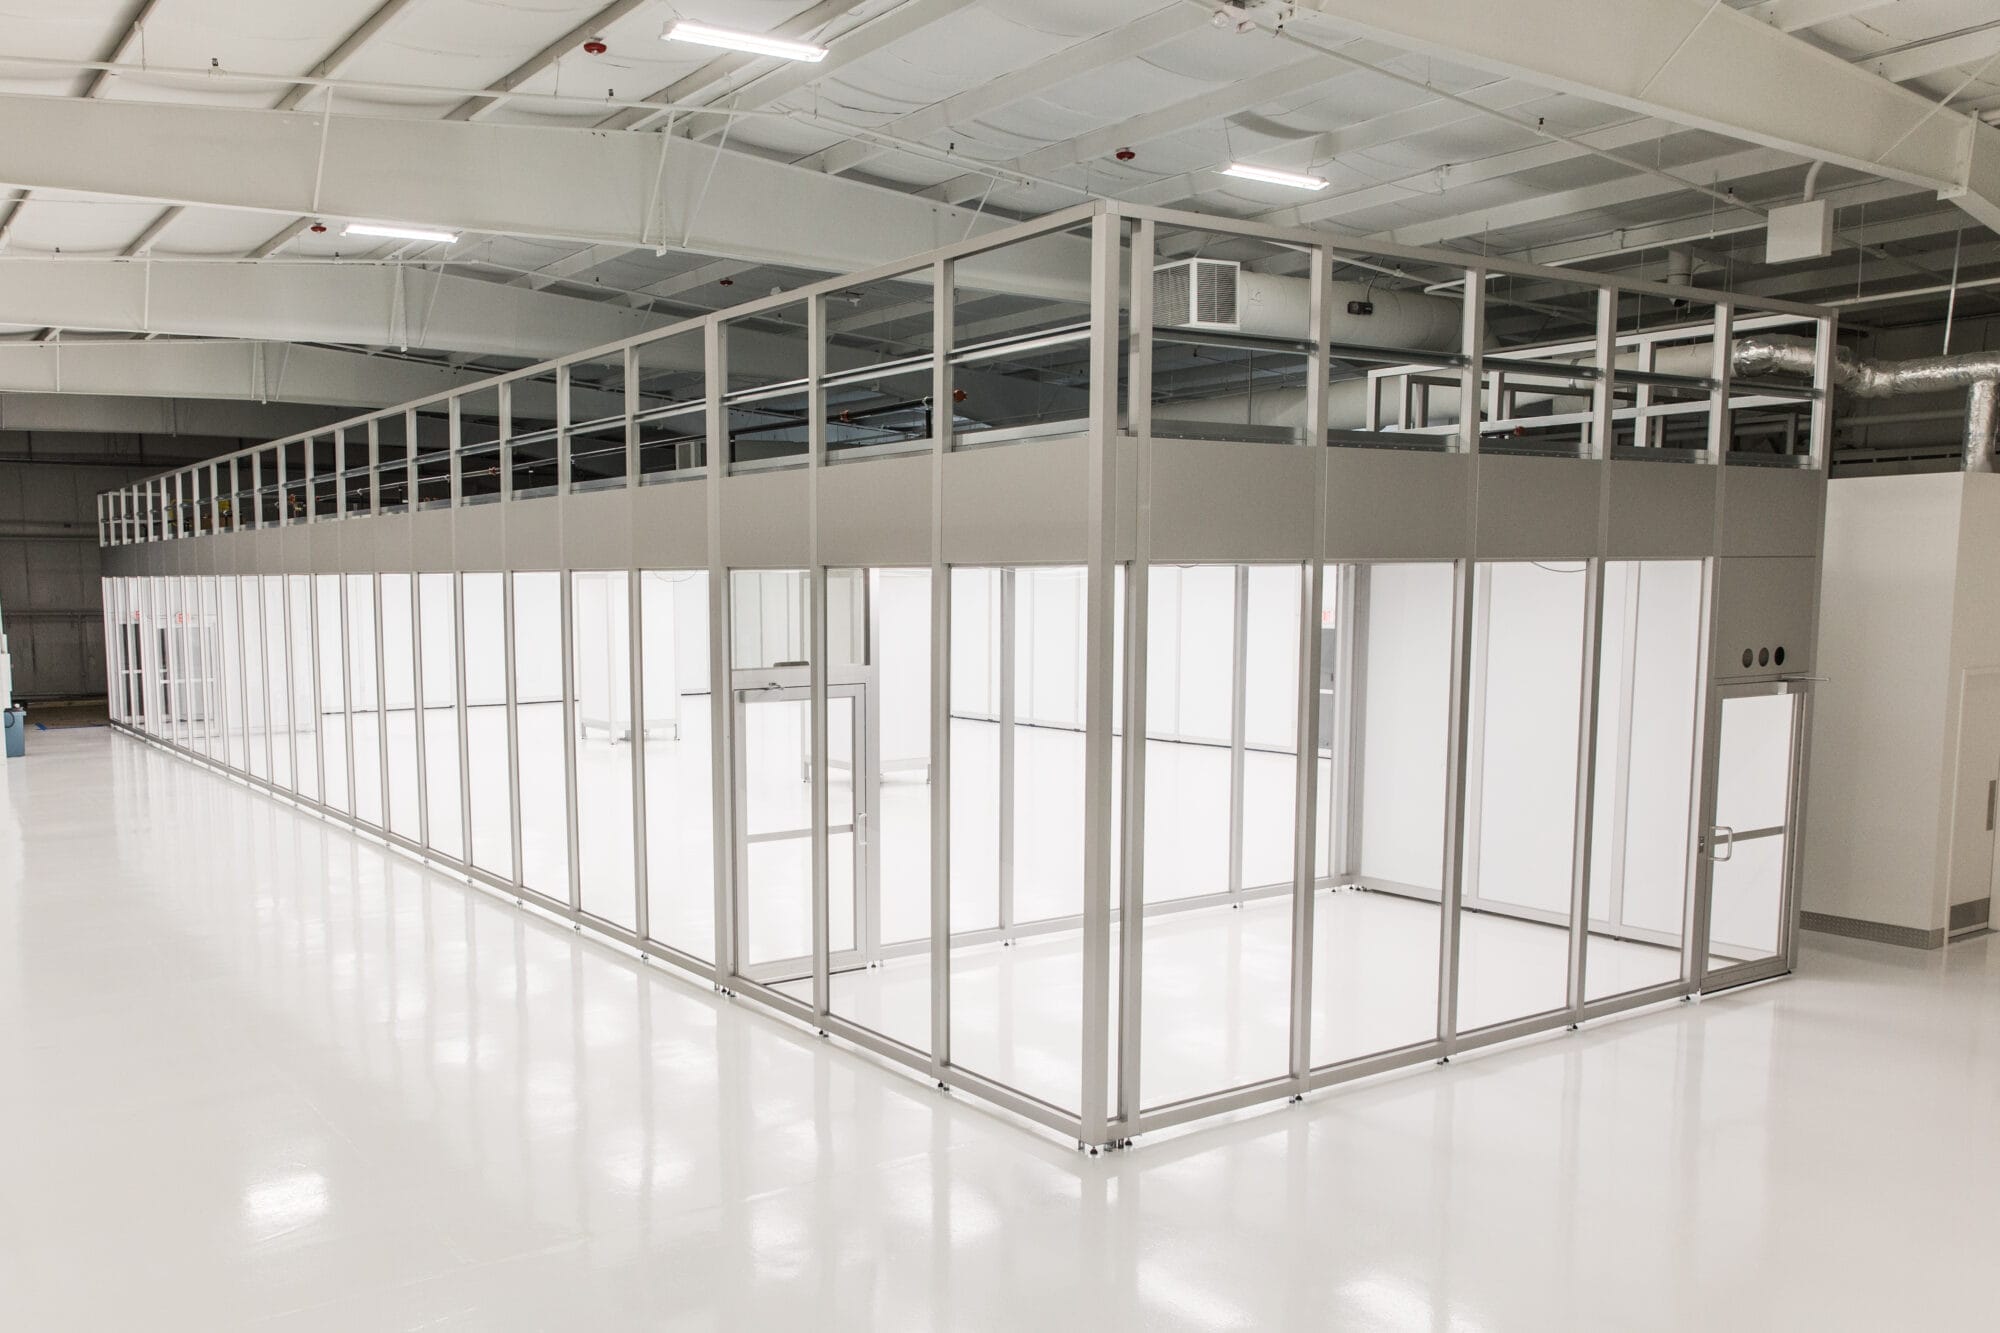 Putnam Medical's 4,500 sq. ft. ISO Certified Class 7 cleanroom